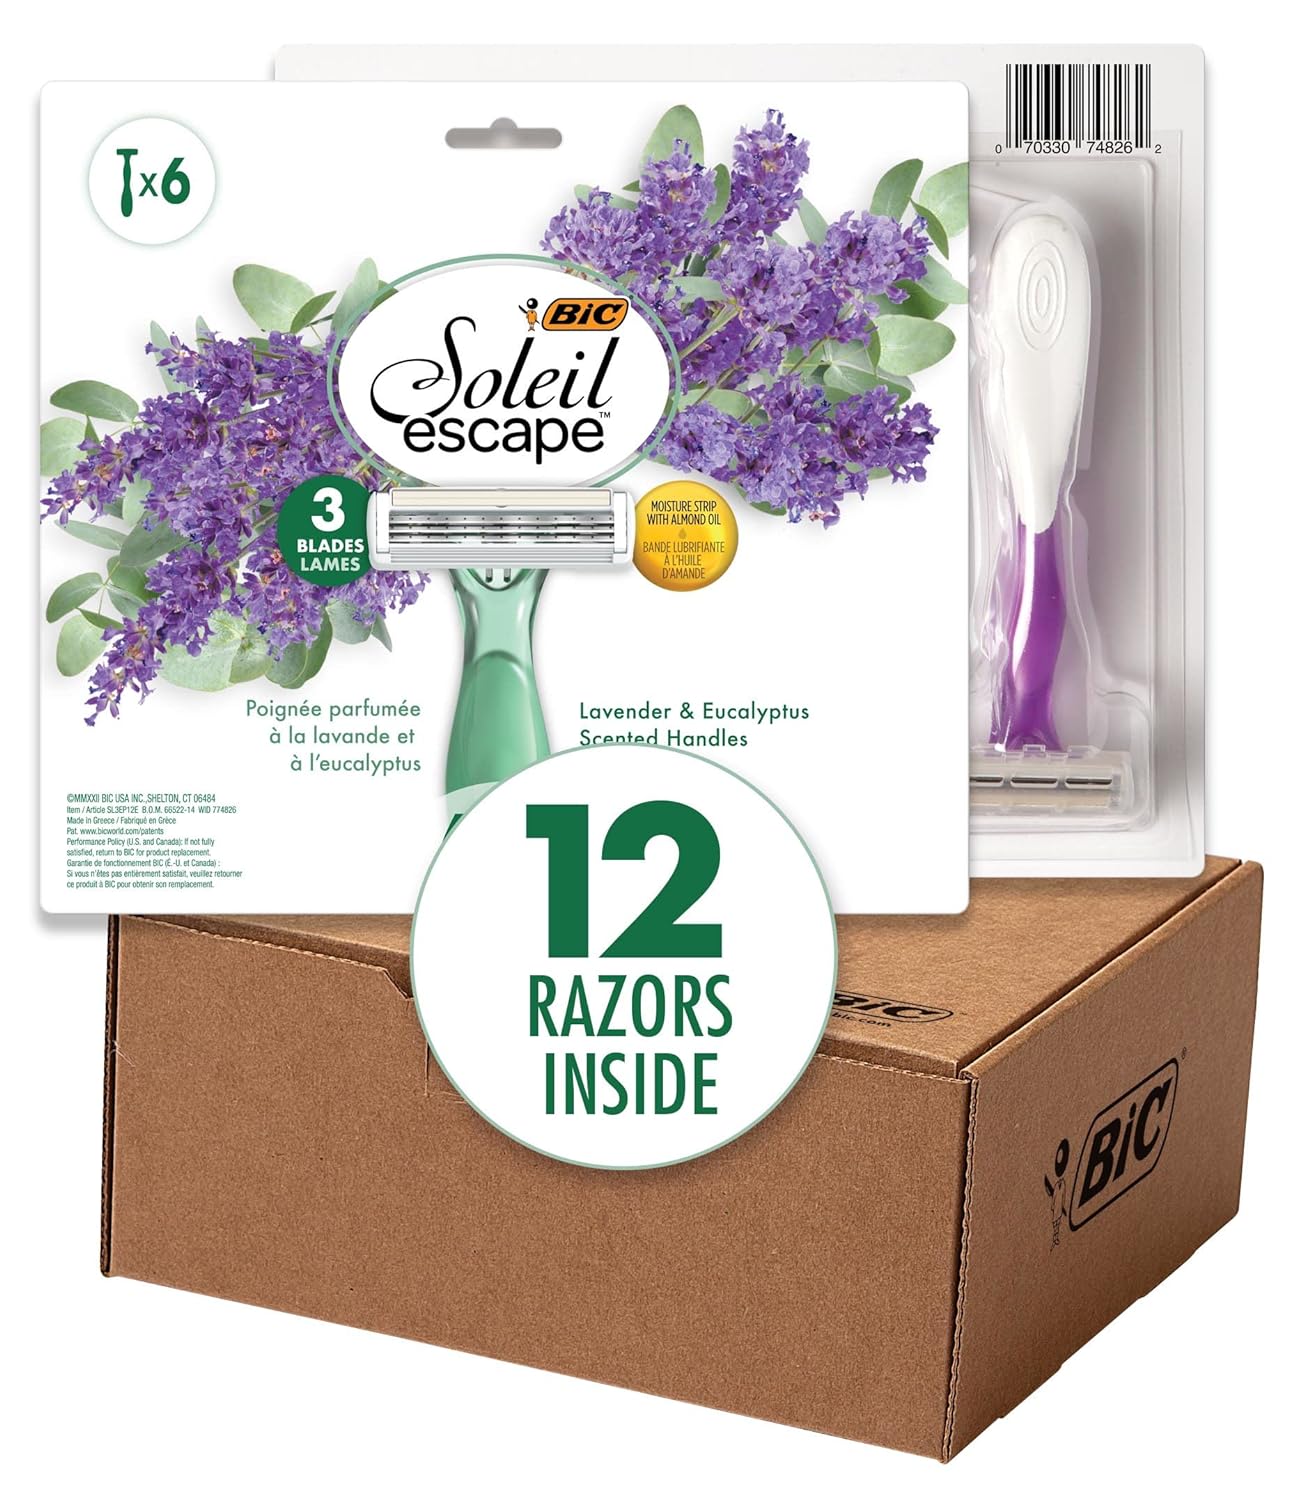 BIC Soleil Escape Women's Disposable Razors With 3 Blades for a Sensorial Experience and Comfortable Shave, Pack of Lavender & Eucalyptus Scented Handle Shaving Razors for Women, 12 Count Green